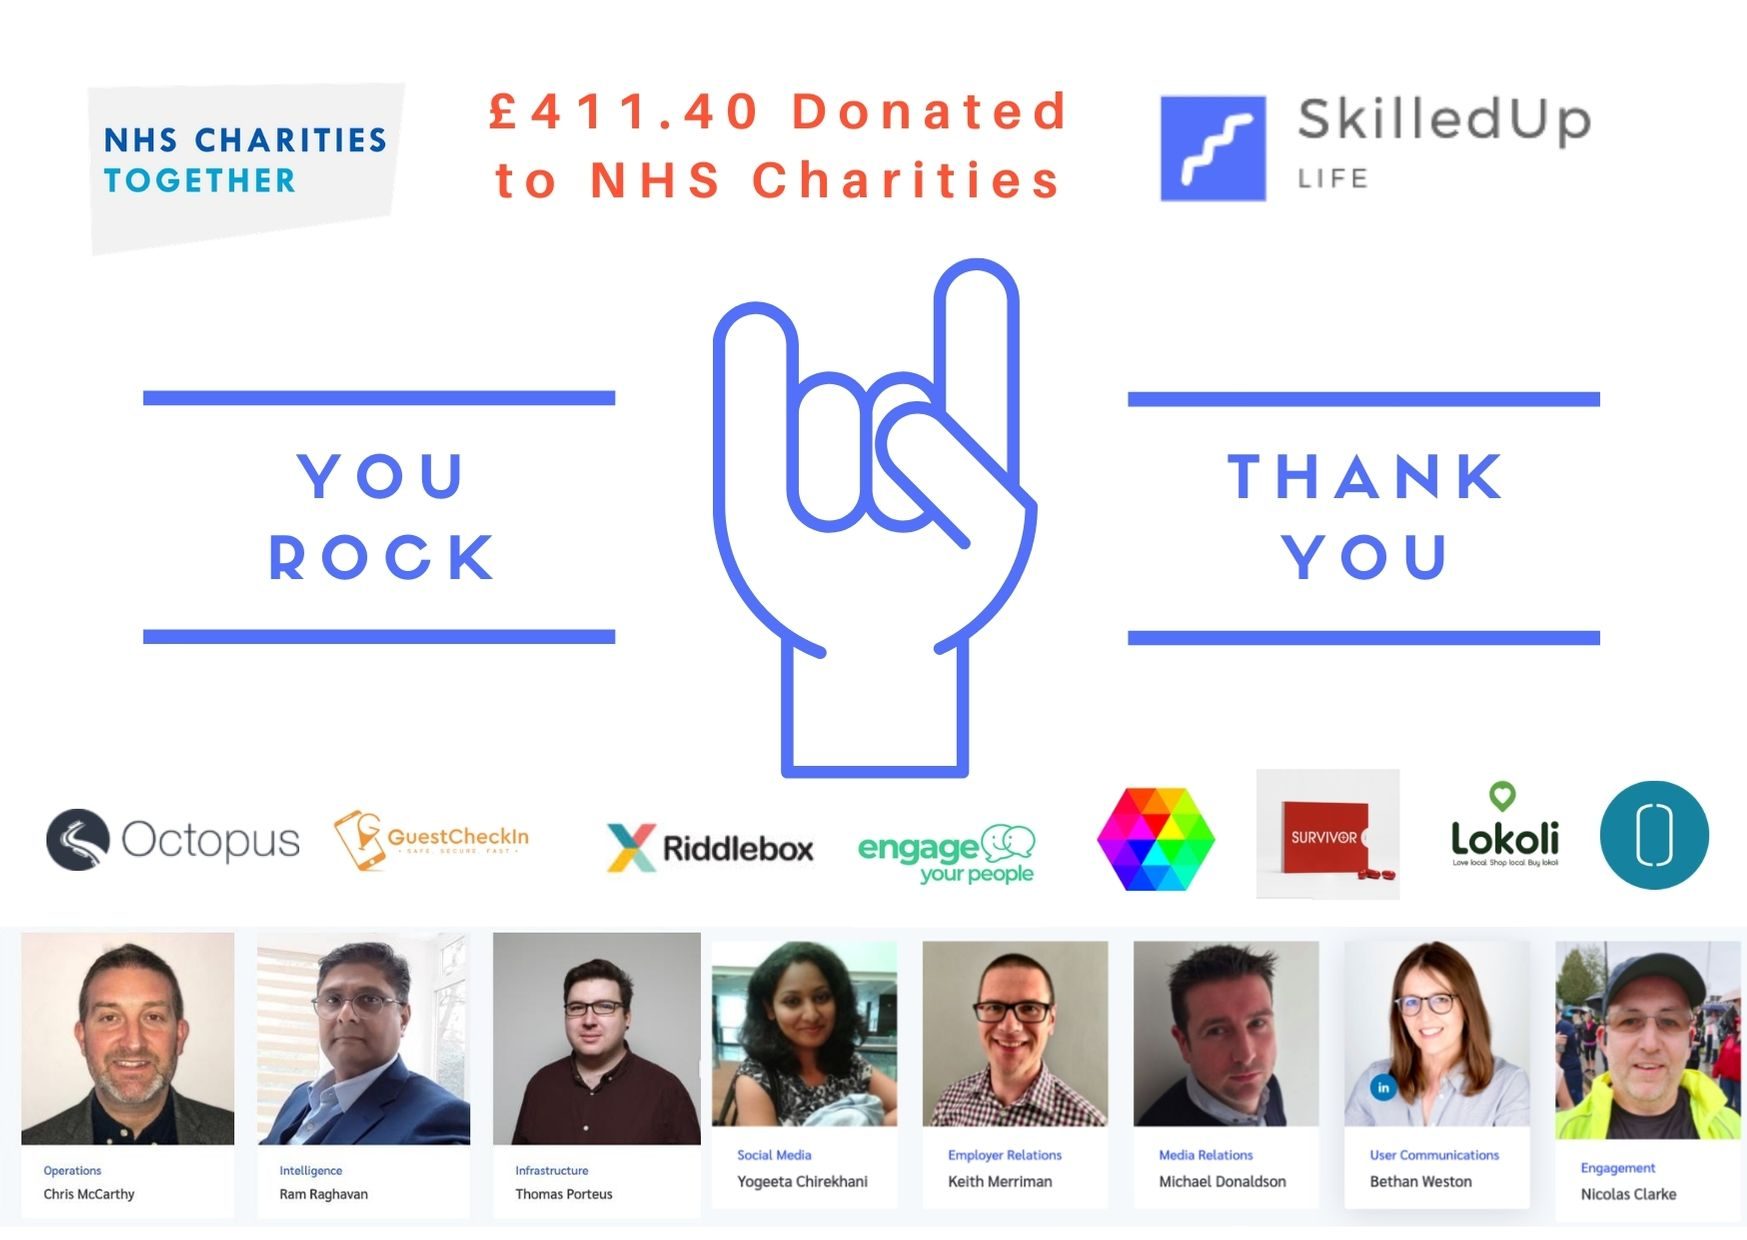 SkilledUp Life Donation of £411.40 to NHS Charities